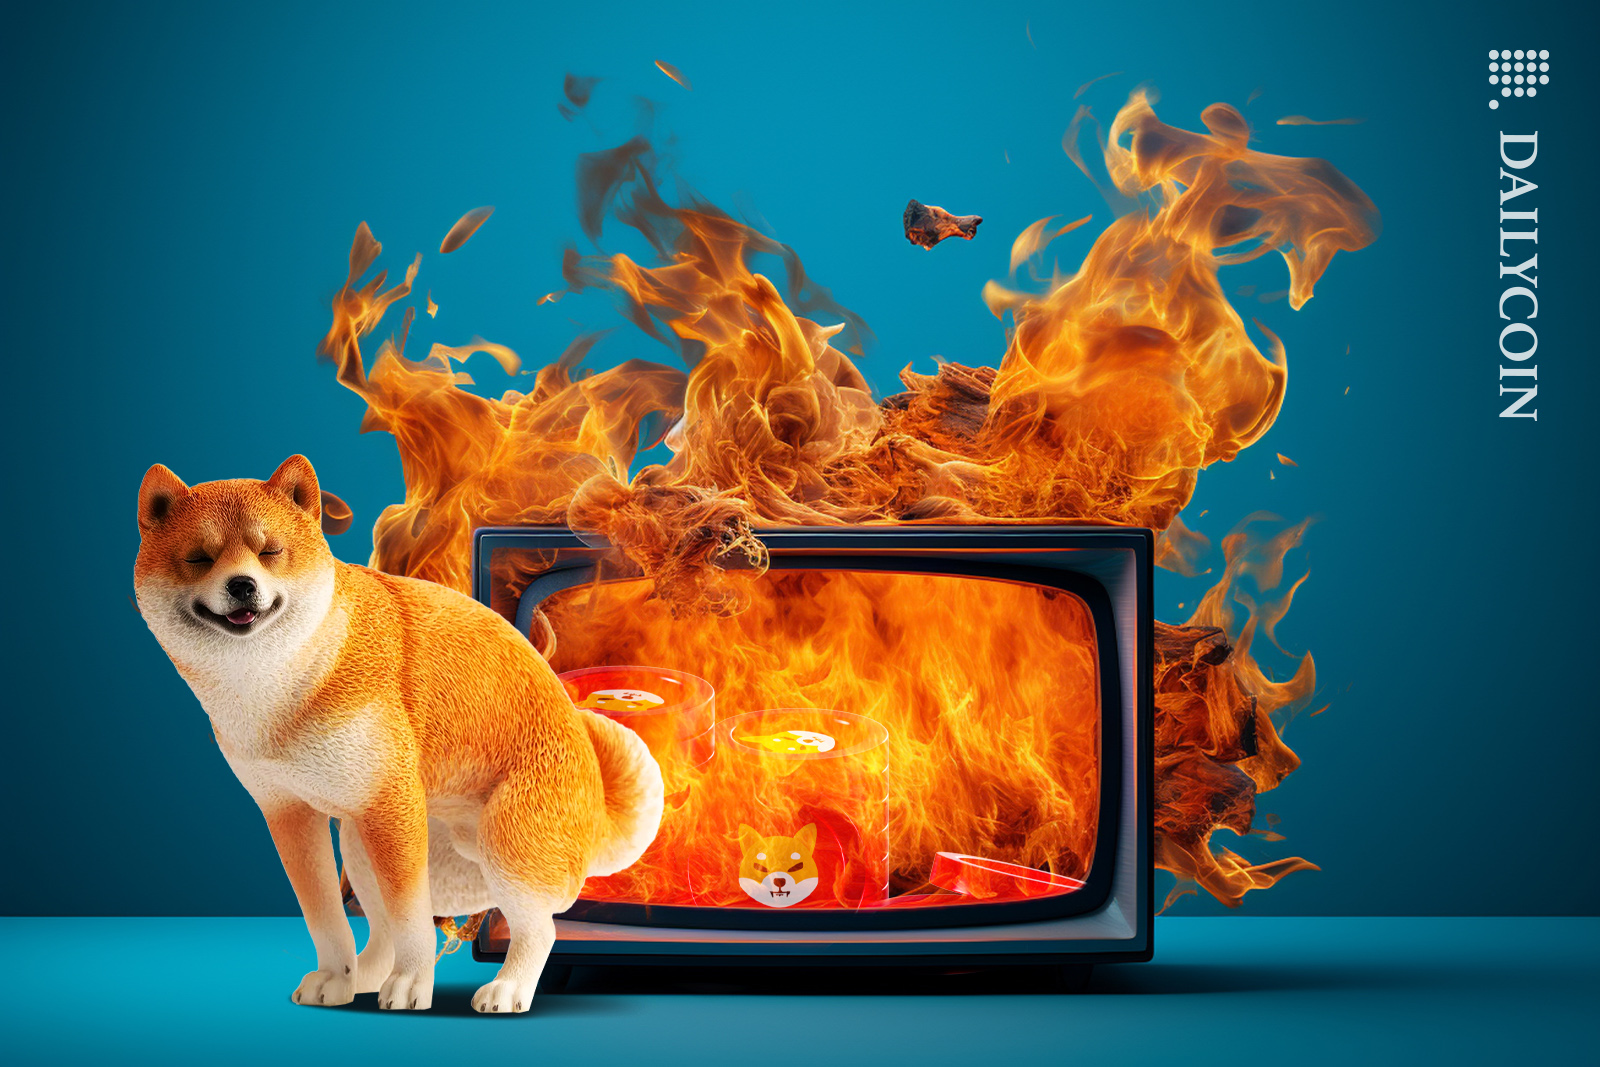 Shiba inu posing next to a TV on fire with Shib tokens.